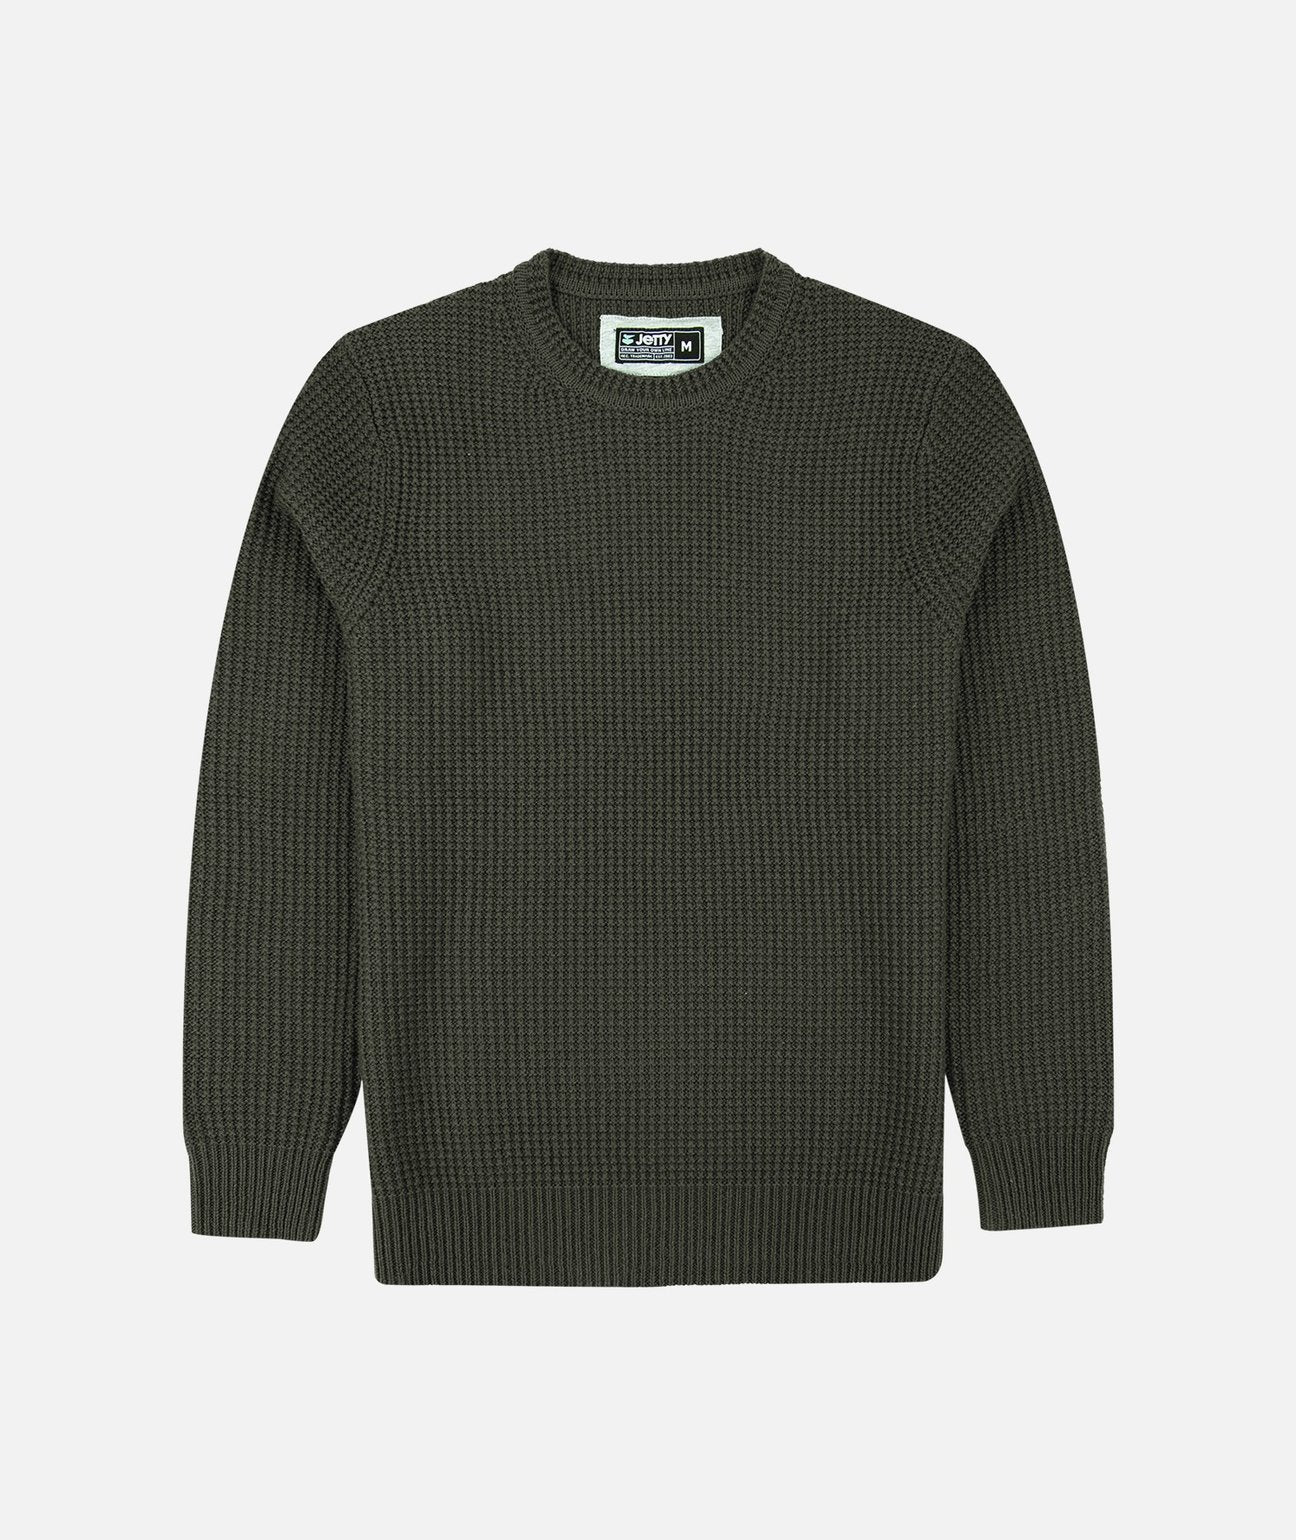 Men's Paragon Sweater - The Lake and Company